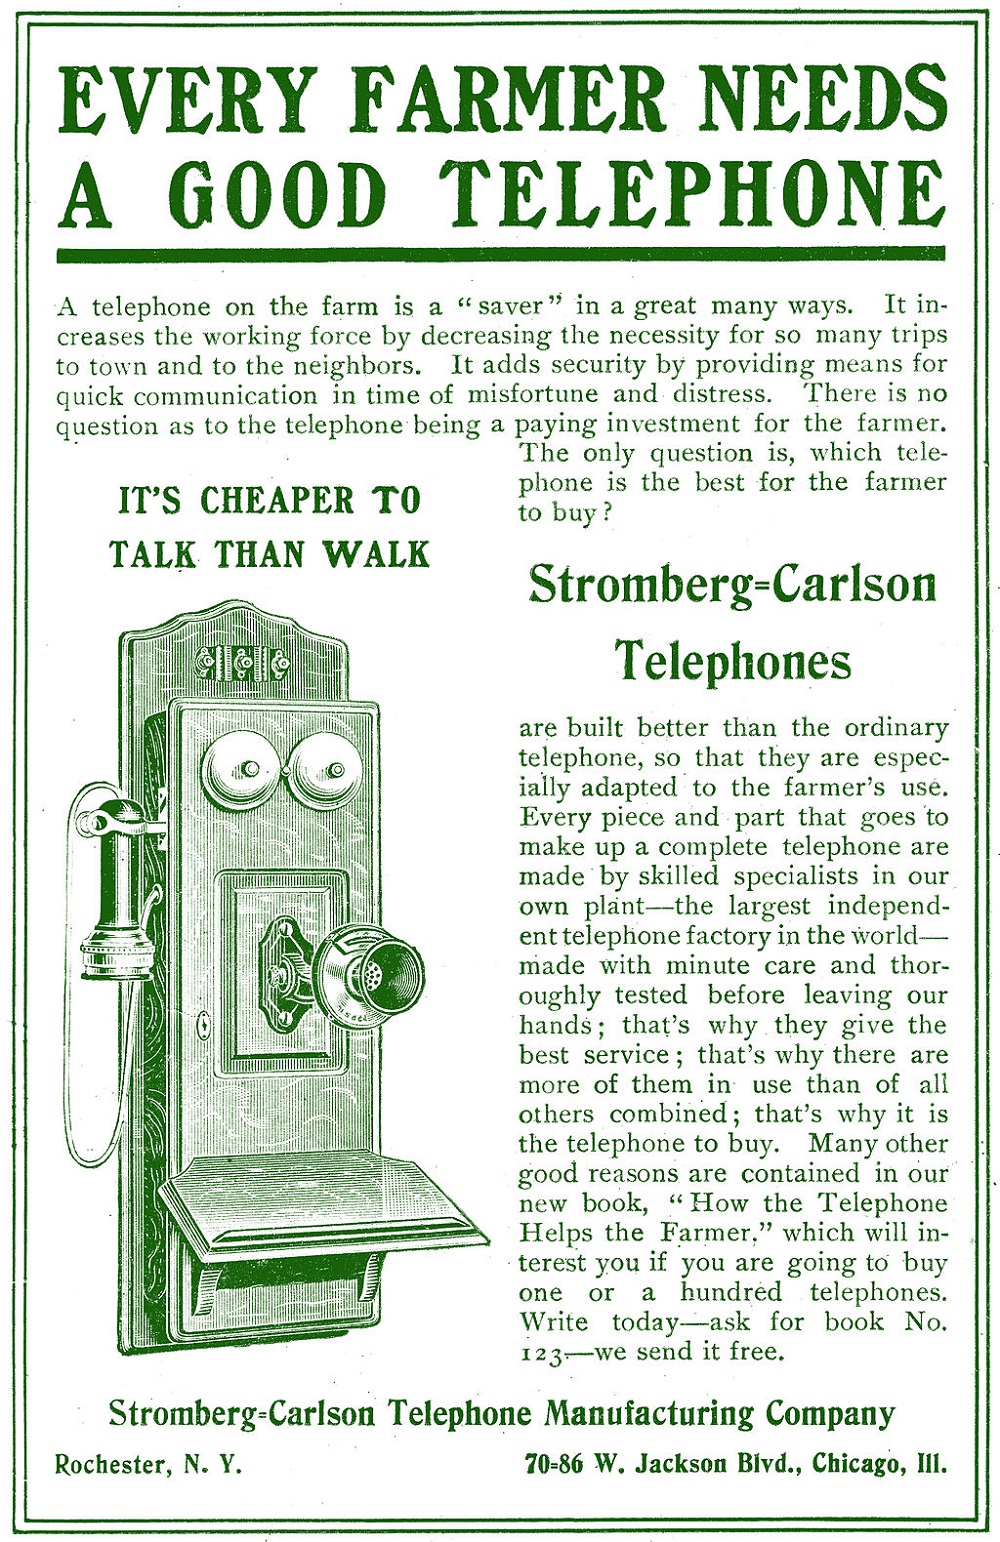 Stromberg-Carlson Telephone Manufacturing Co. Advertisement 1905. Credit to Wikipedia.